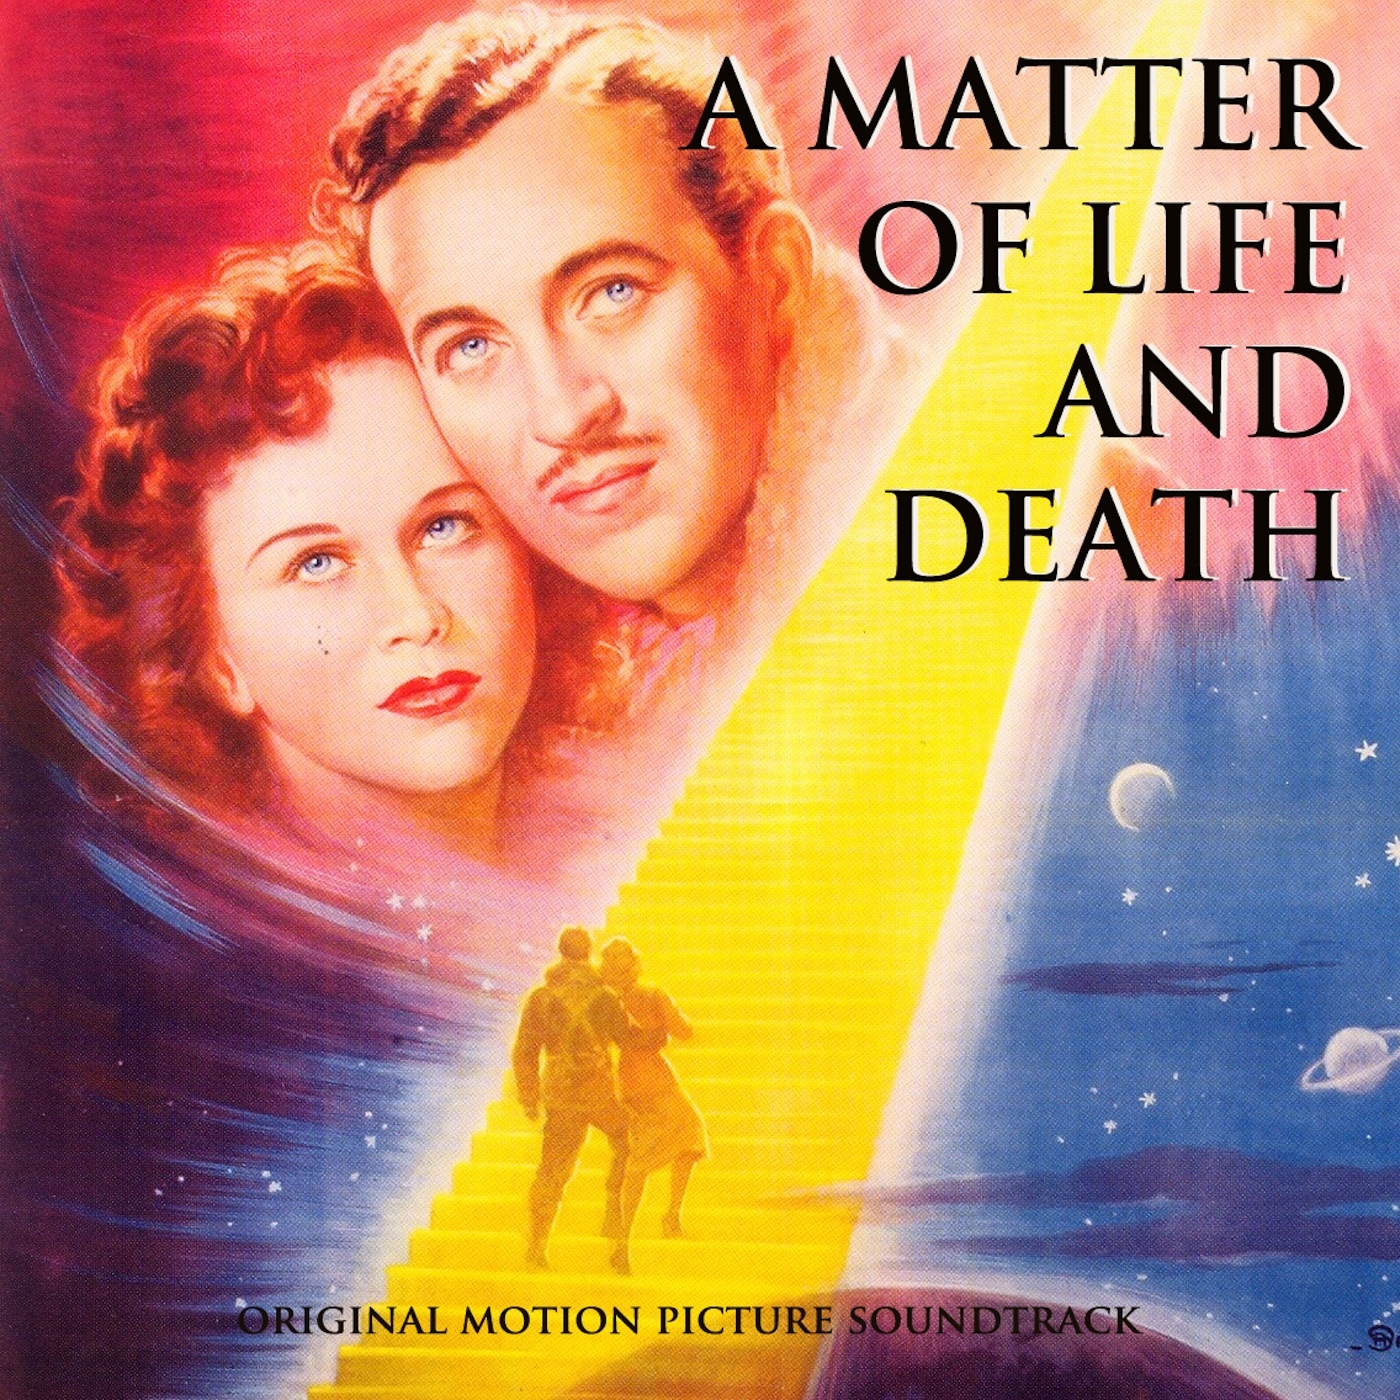 A Matter of Life and Death: Original Motion Picture Soundtrack (Remastered)